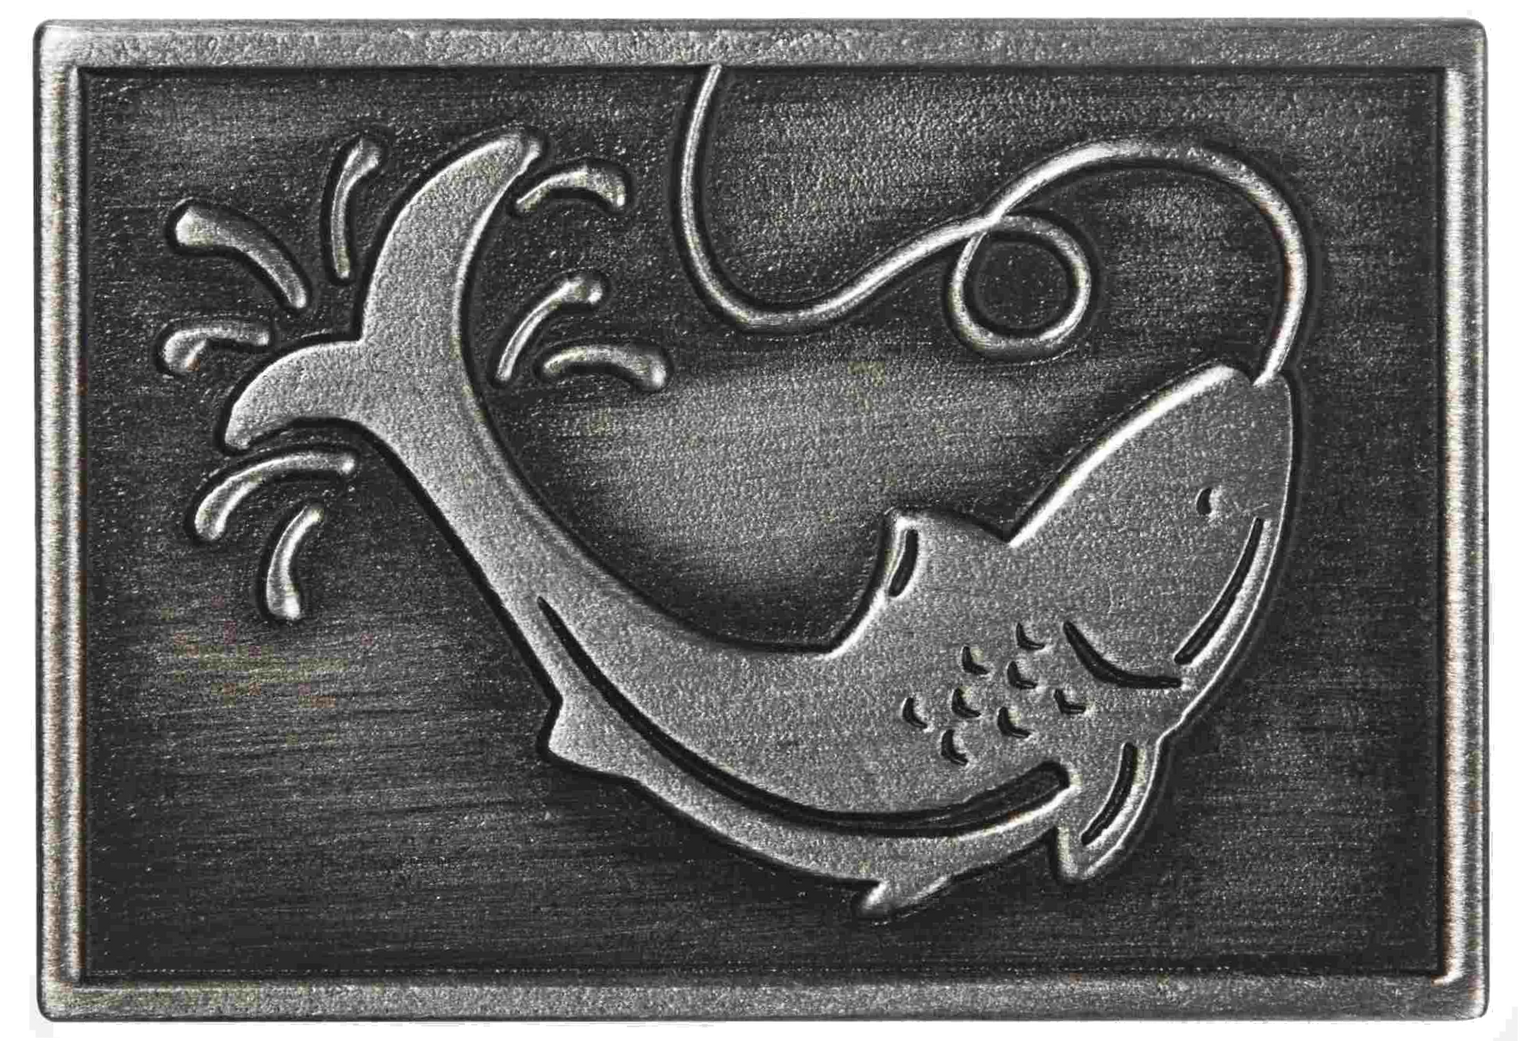 Featuring View of the Fishing Metal Etched Emblem from Carkella by Wallaroo